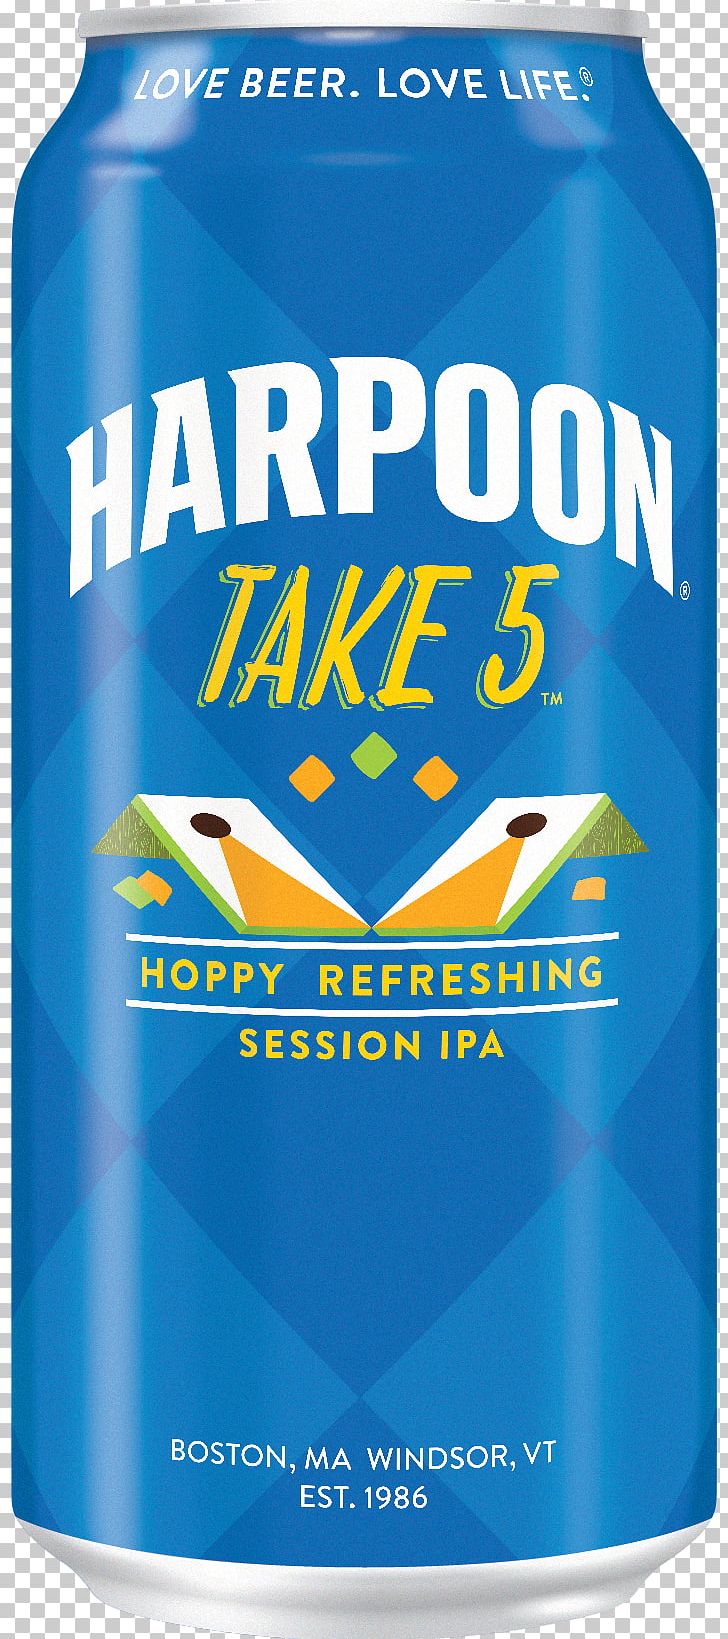 Harpoon Brewery And Beer Hall India Pale Ale Harpoon IPA PNG, Clipart, Alcohol By Volume, Alcoholic Drink, Beer, Beer Hall, Beverage Can Free PNG Download